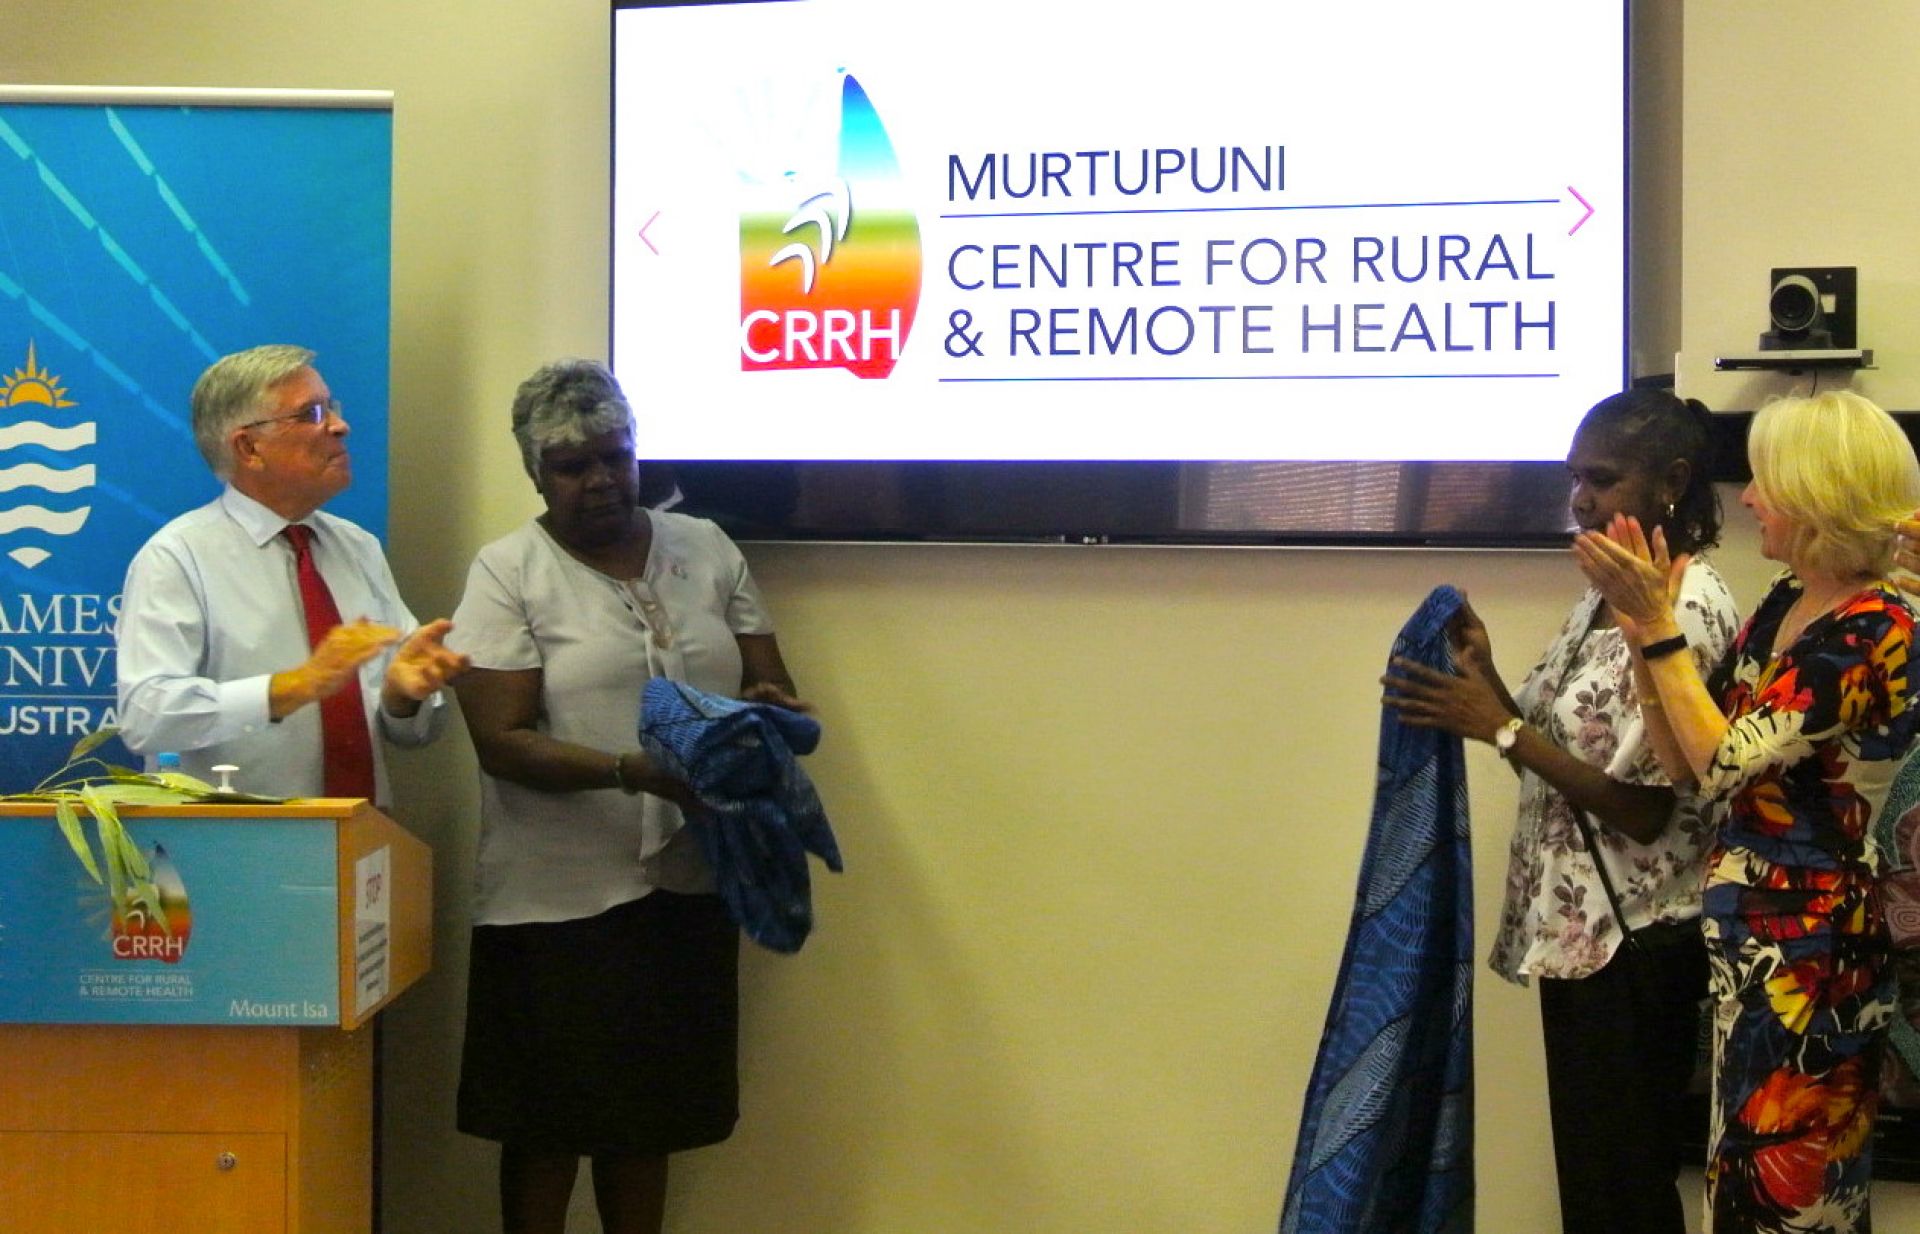 unveiling of the Mount Isa campus indigenous name